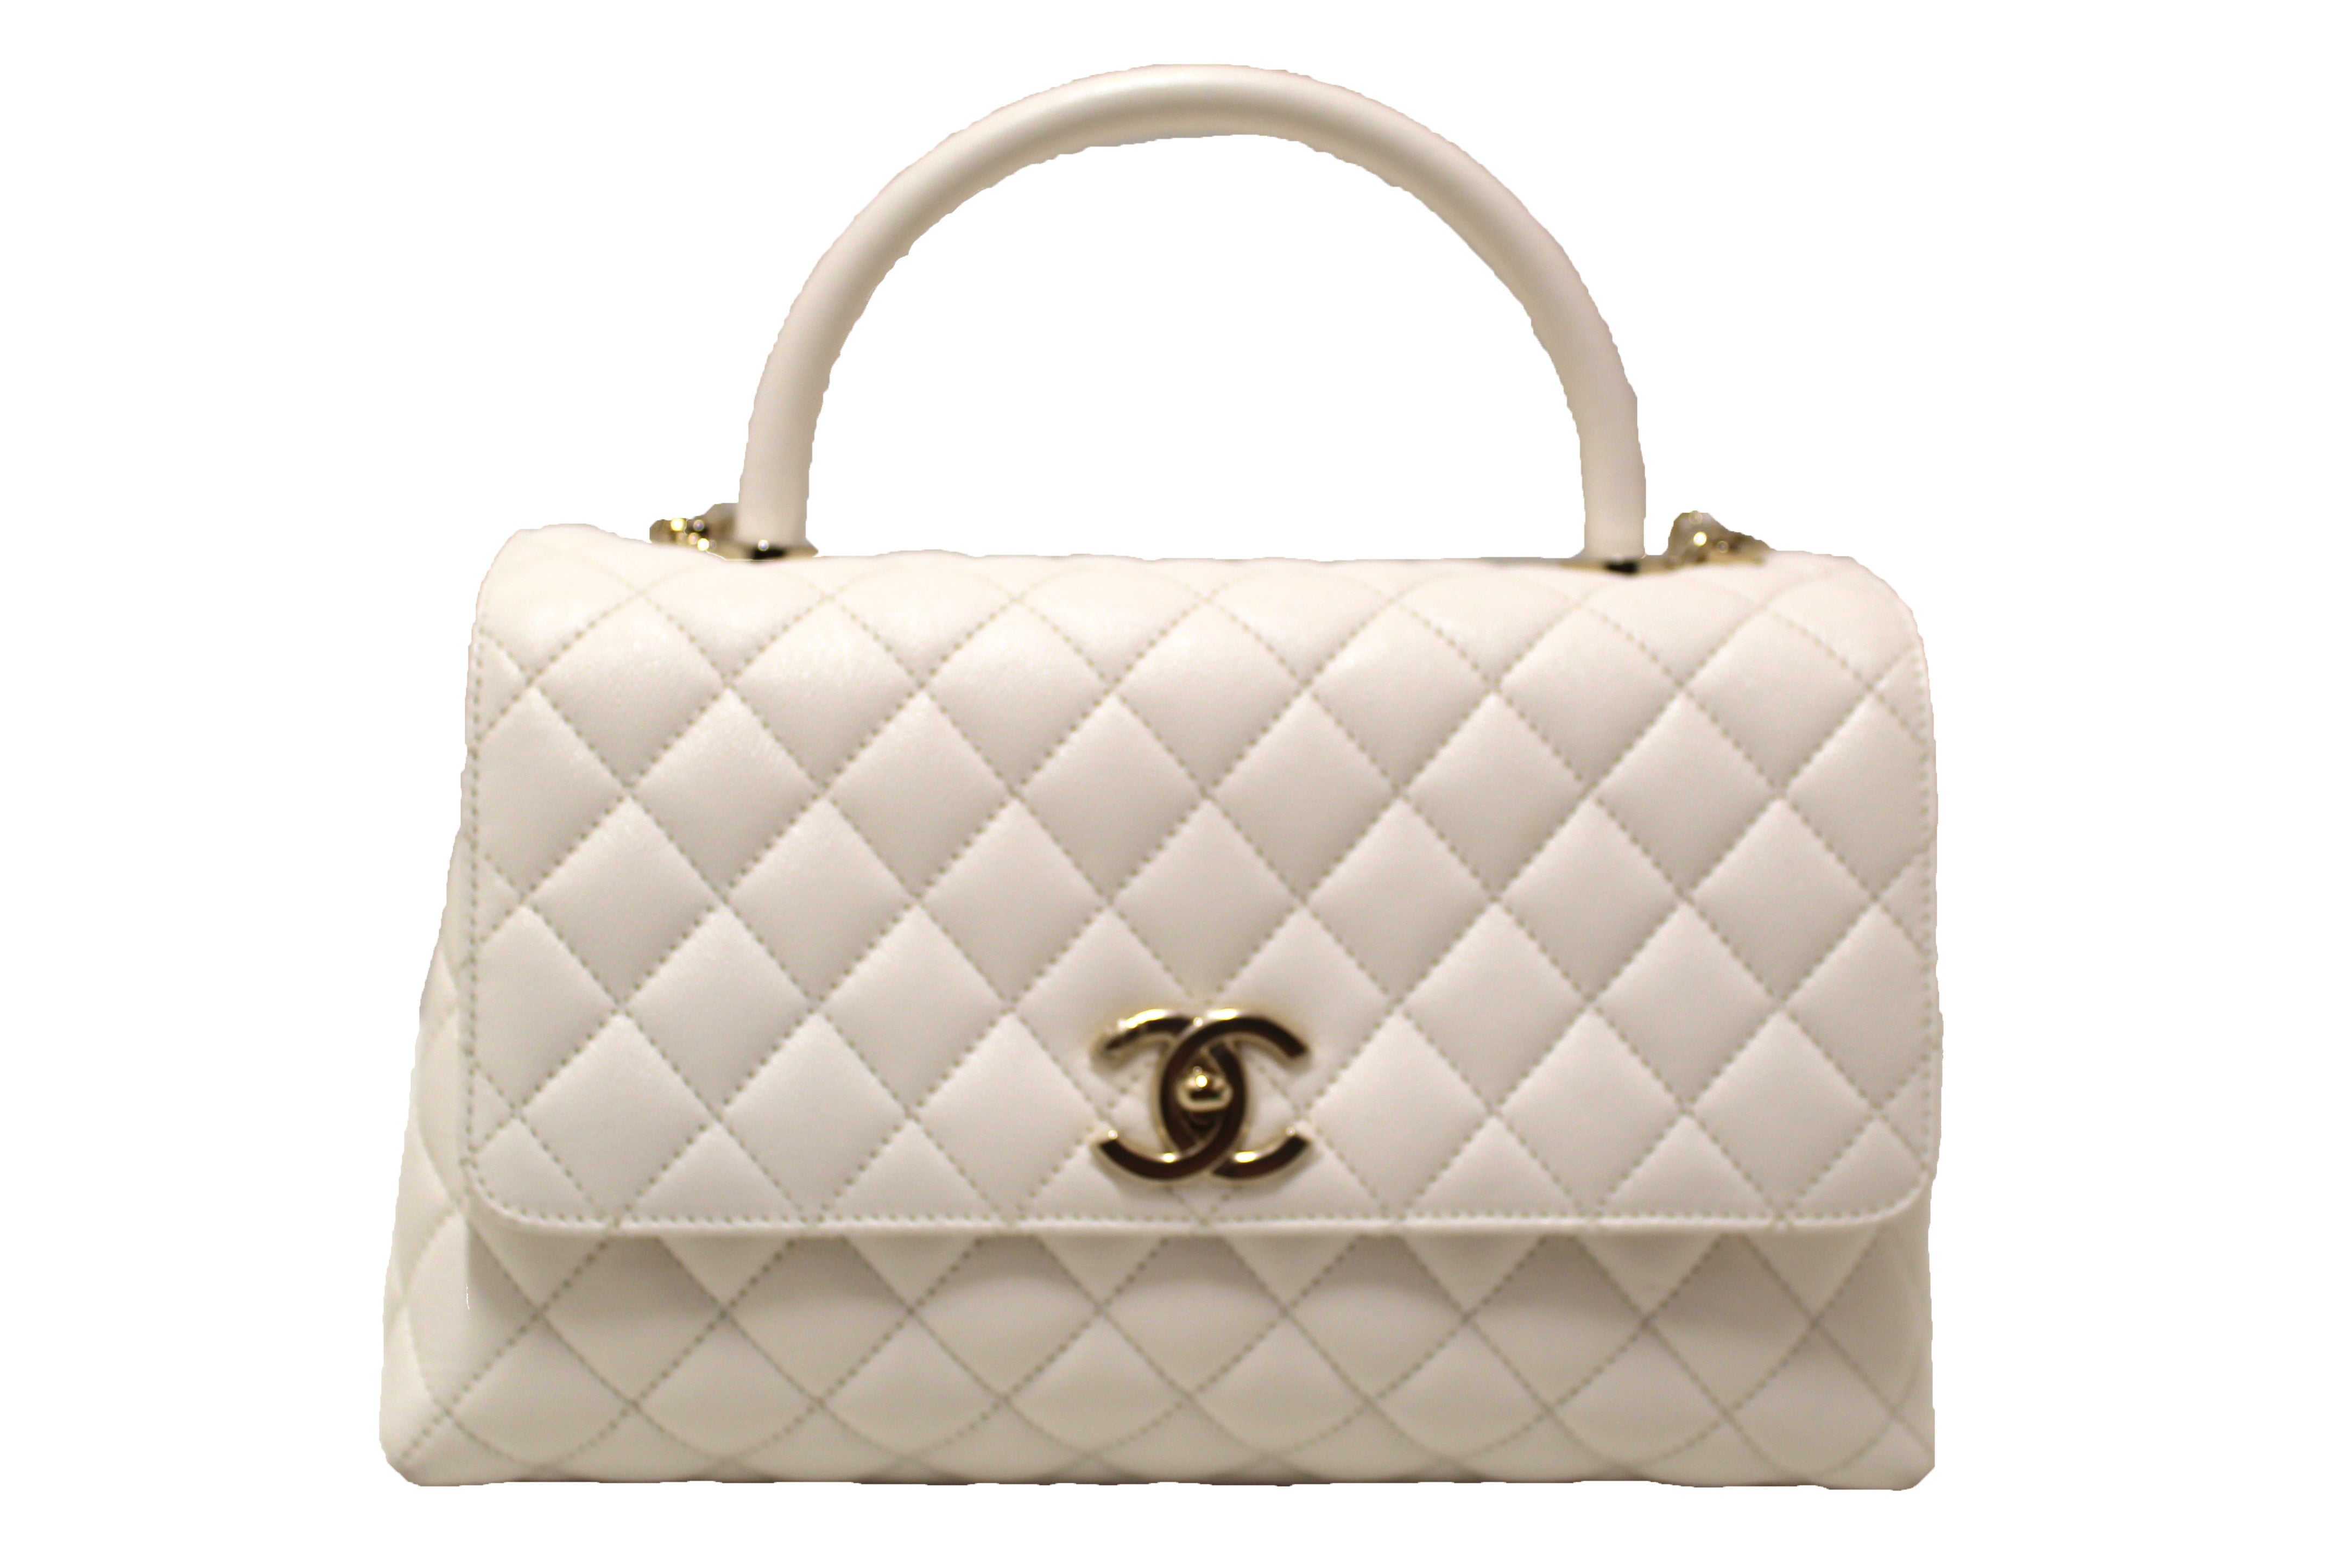 Authentic Chanel White Quilted Caviar Leather Medium CoCo Handle Flap Bag